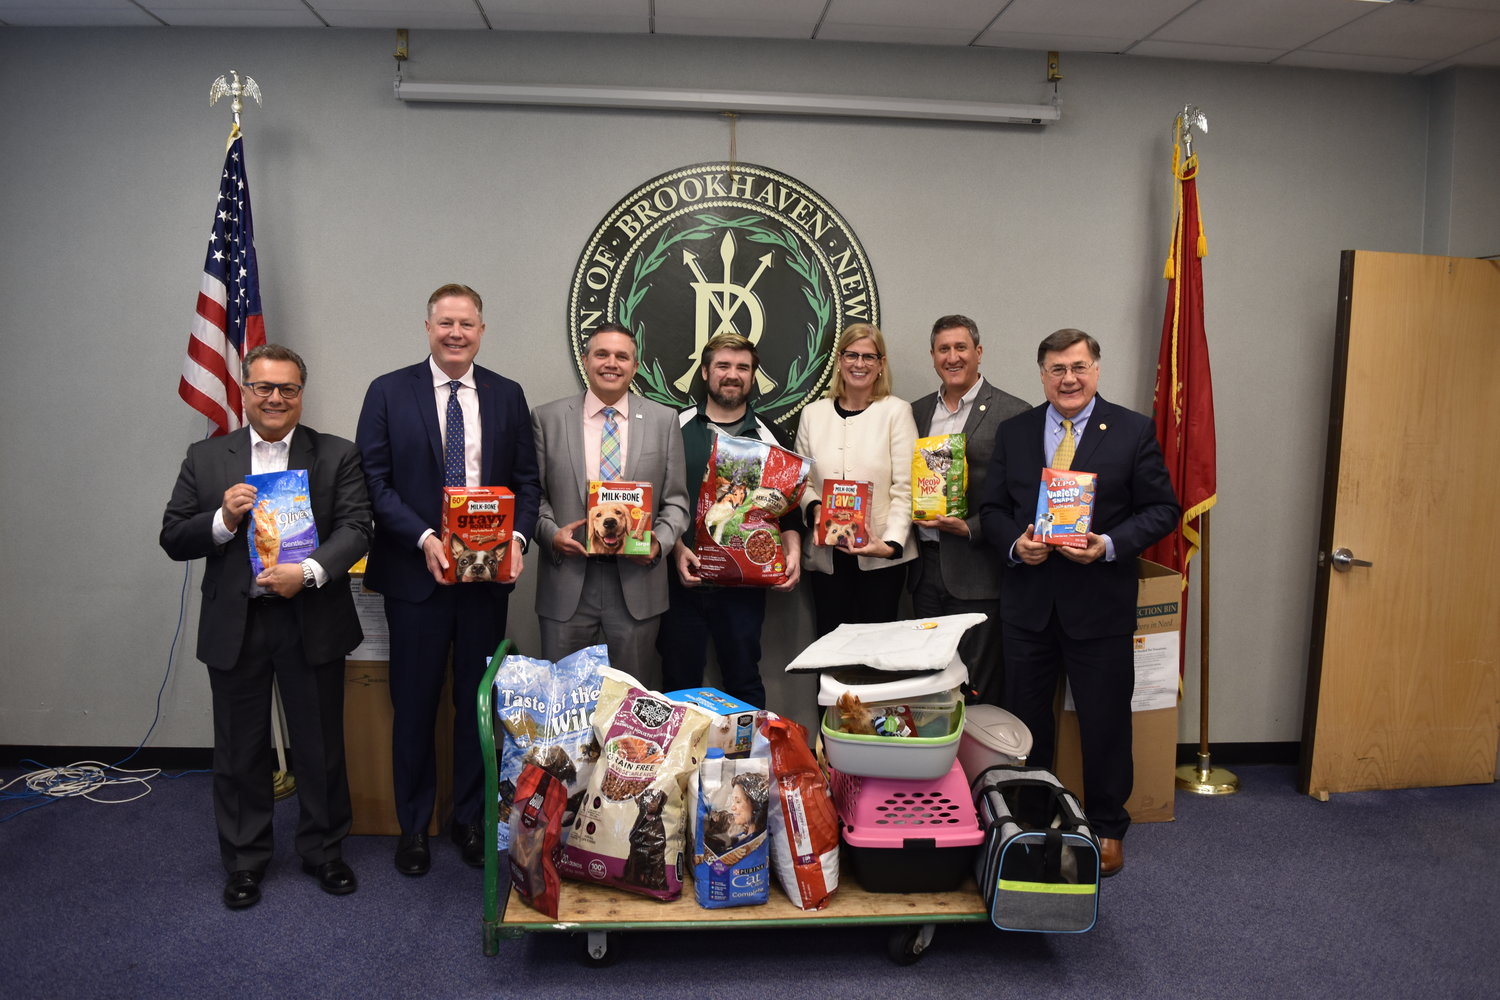 Pictured left to right are councilman Michael Loguercio; councilman Neil Foley; councilman Kevin LaValle; Long Island Cares - The Harry Chapin Food Bank Food Drive manager, Billy Gonyou; councilwoman Jane Bonner; councilmember Jonathan Kornreich; and supervisor Ed Romaine.